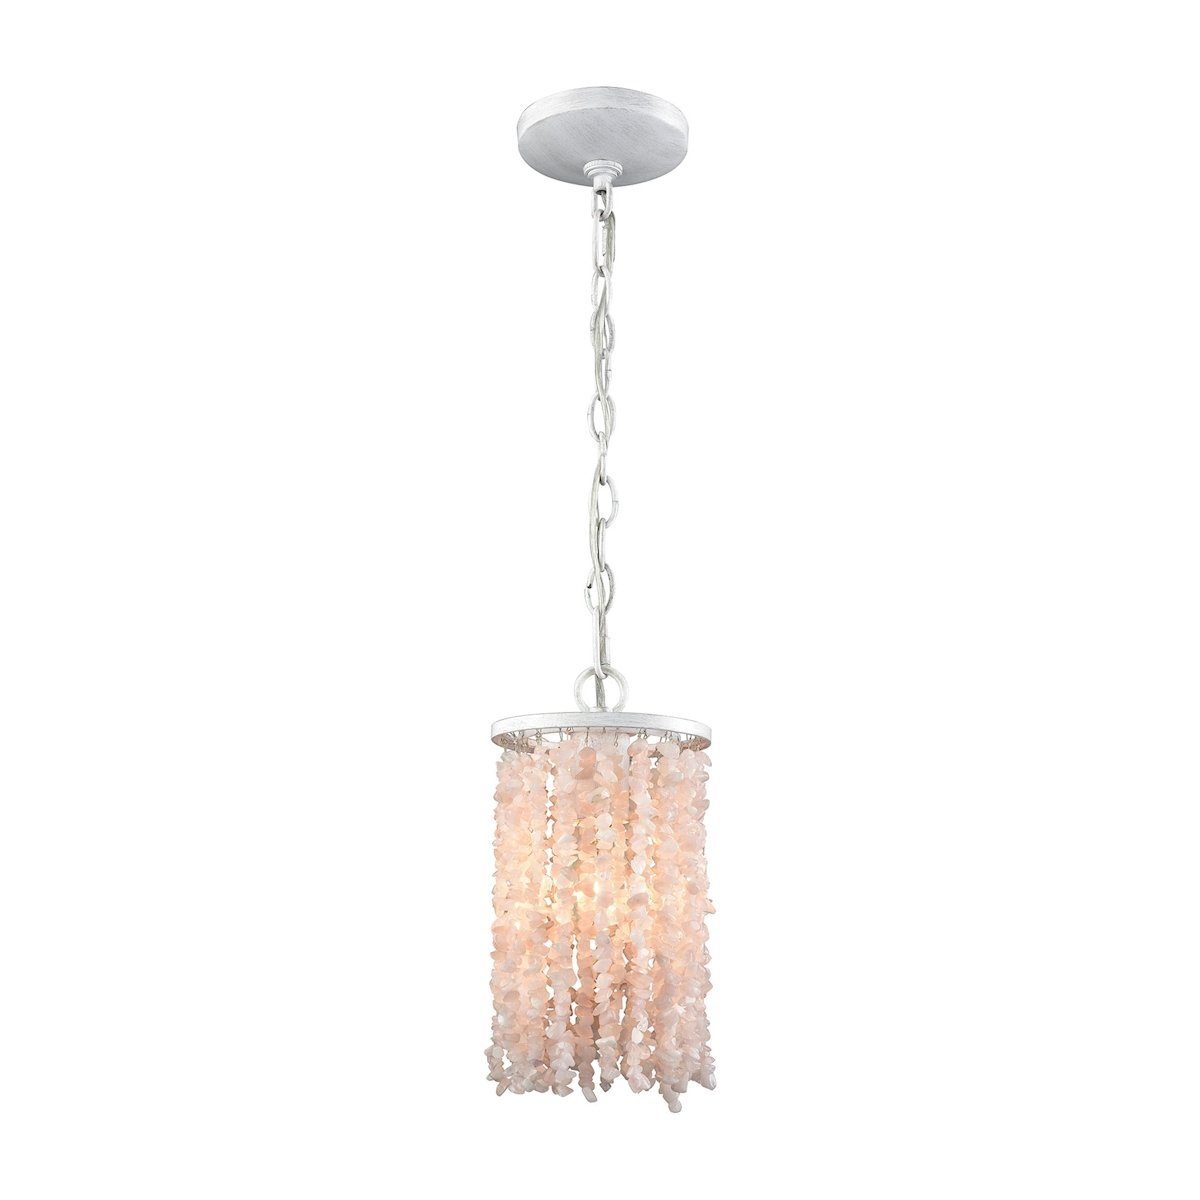 Agate Stones Pendant In Off White With White And Pink Agate Stones Ceiling Elk Lighting 